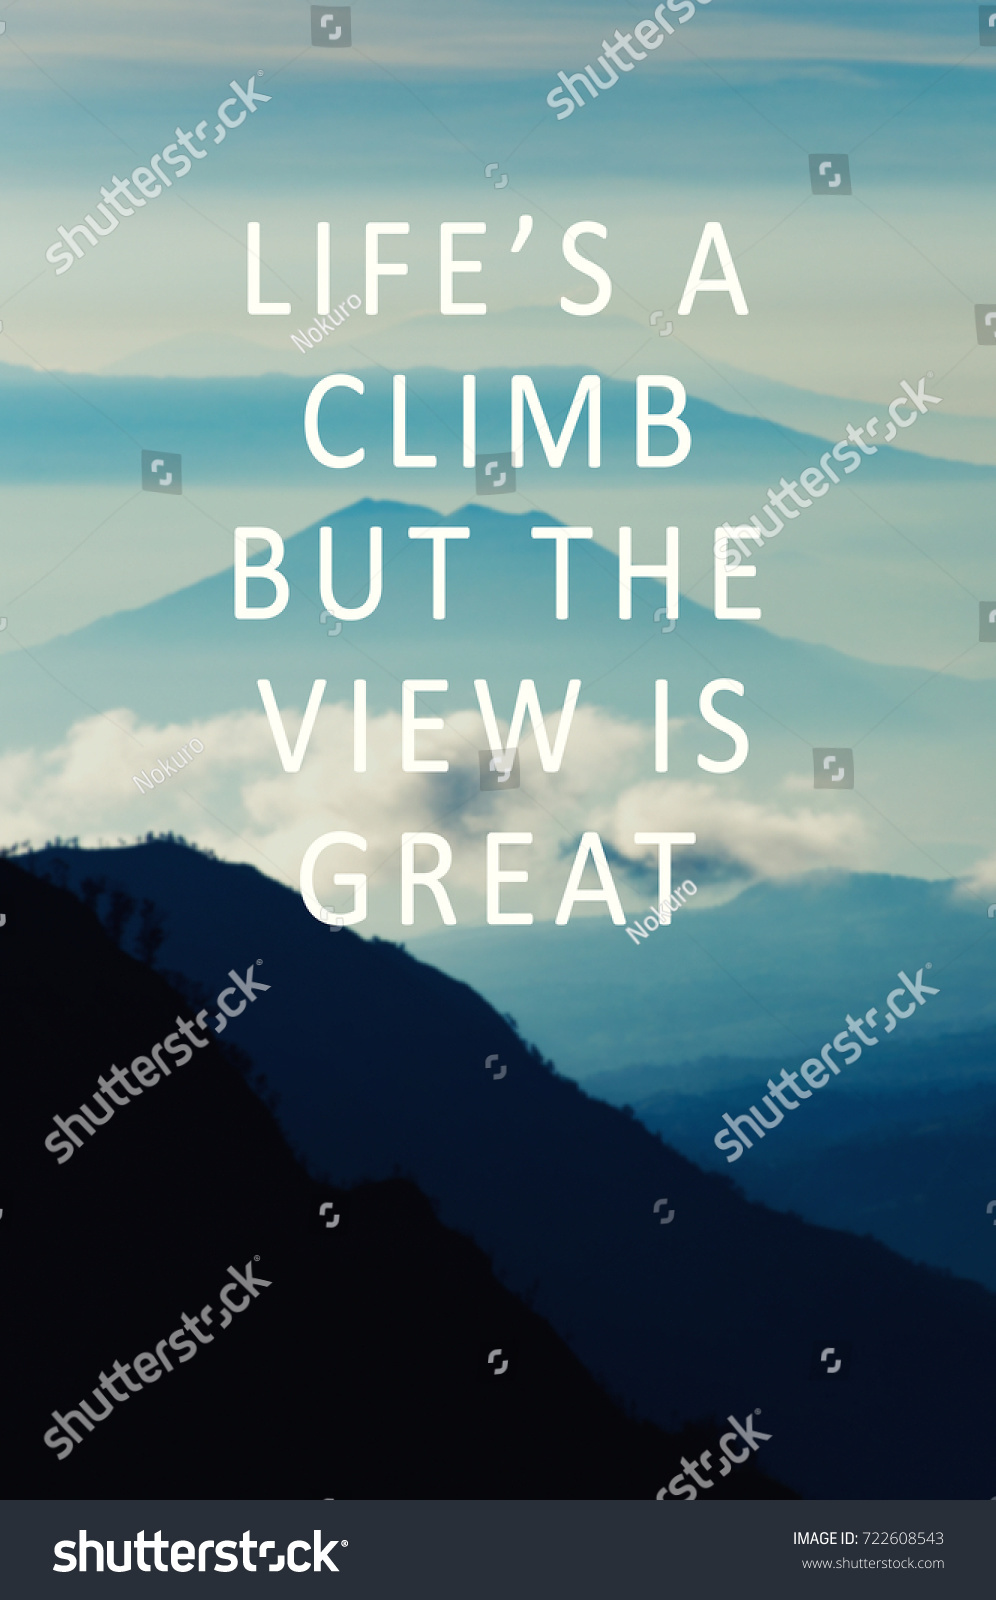 Life motivational and inspirational quotes Life s a climb bit the view is great Blurry